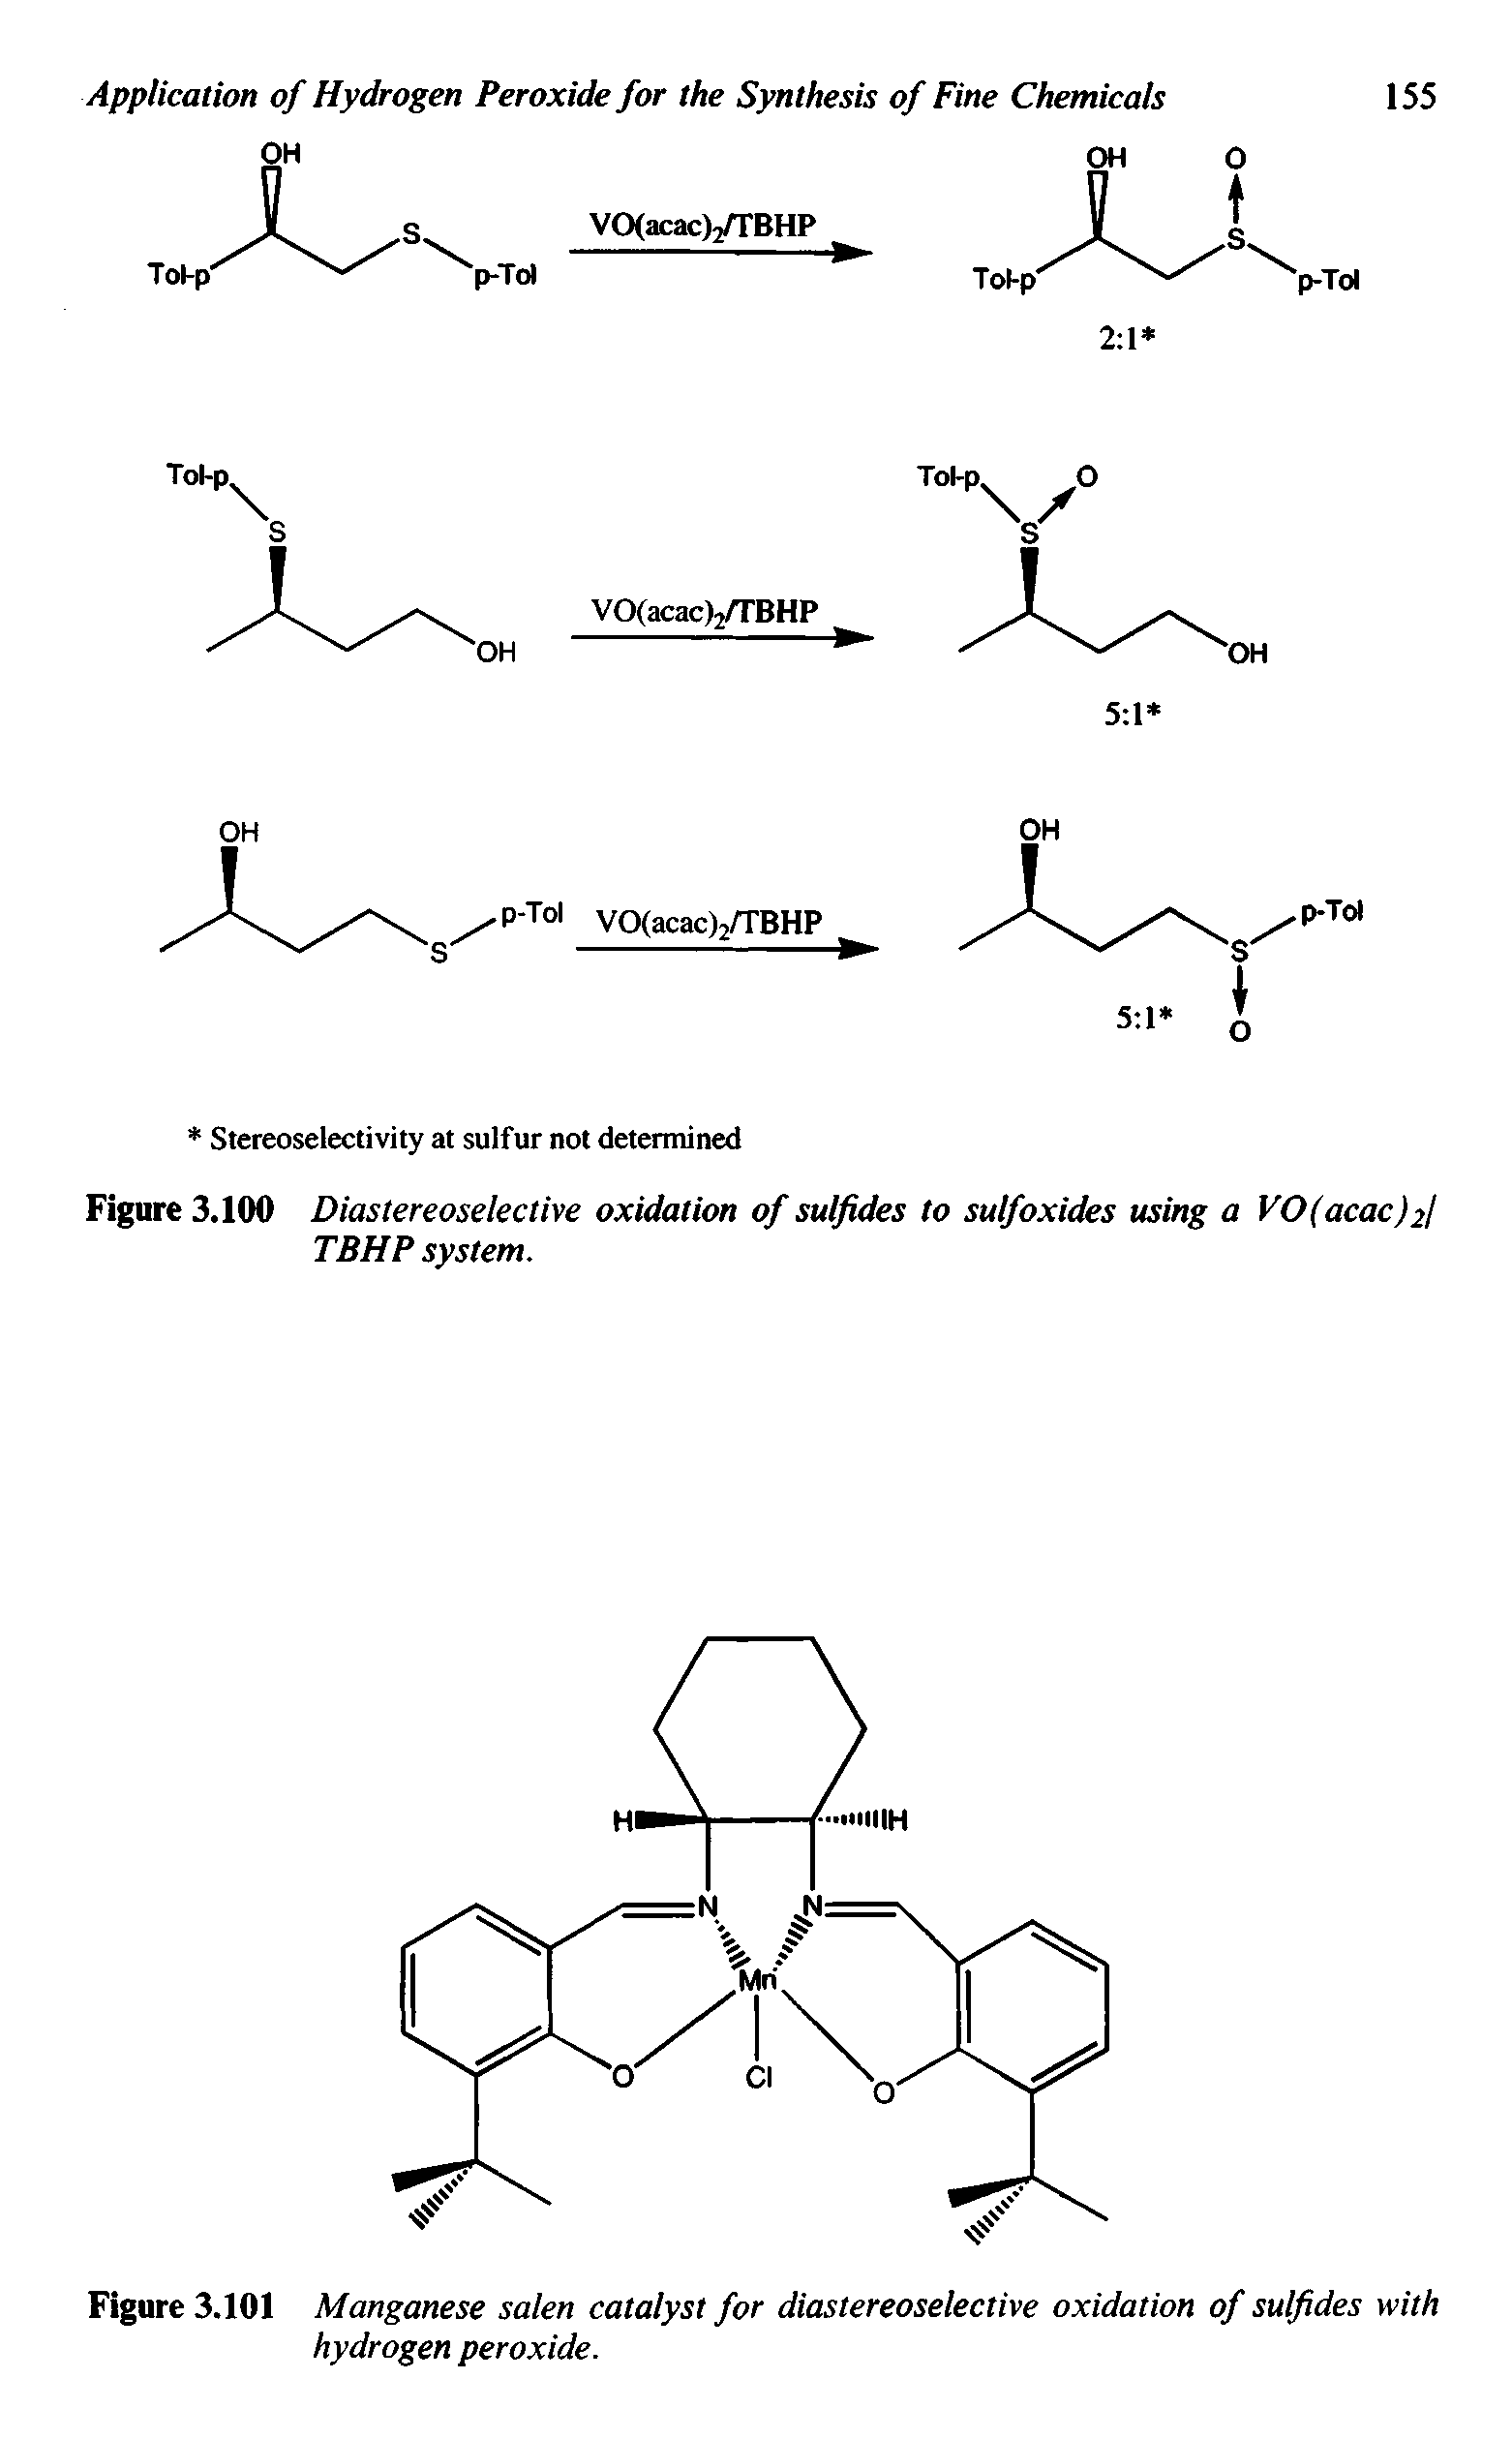 Figure 3.101 Manganese salen catalyst for diastereoselective oxidation of sulfides with hydrogen peroxide.